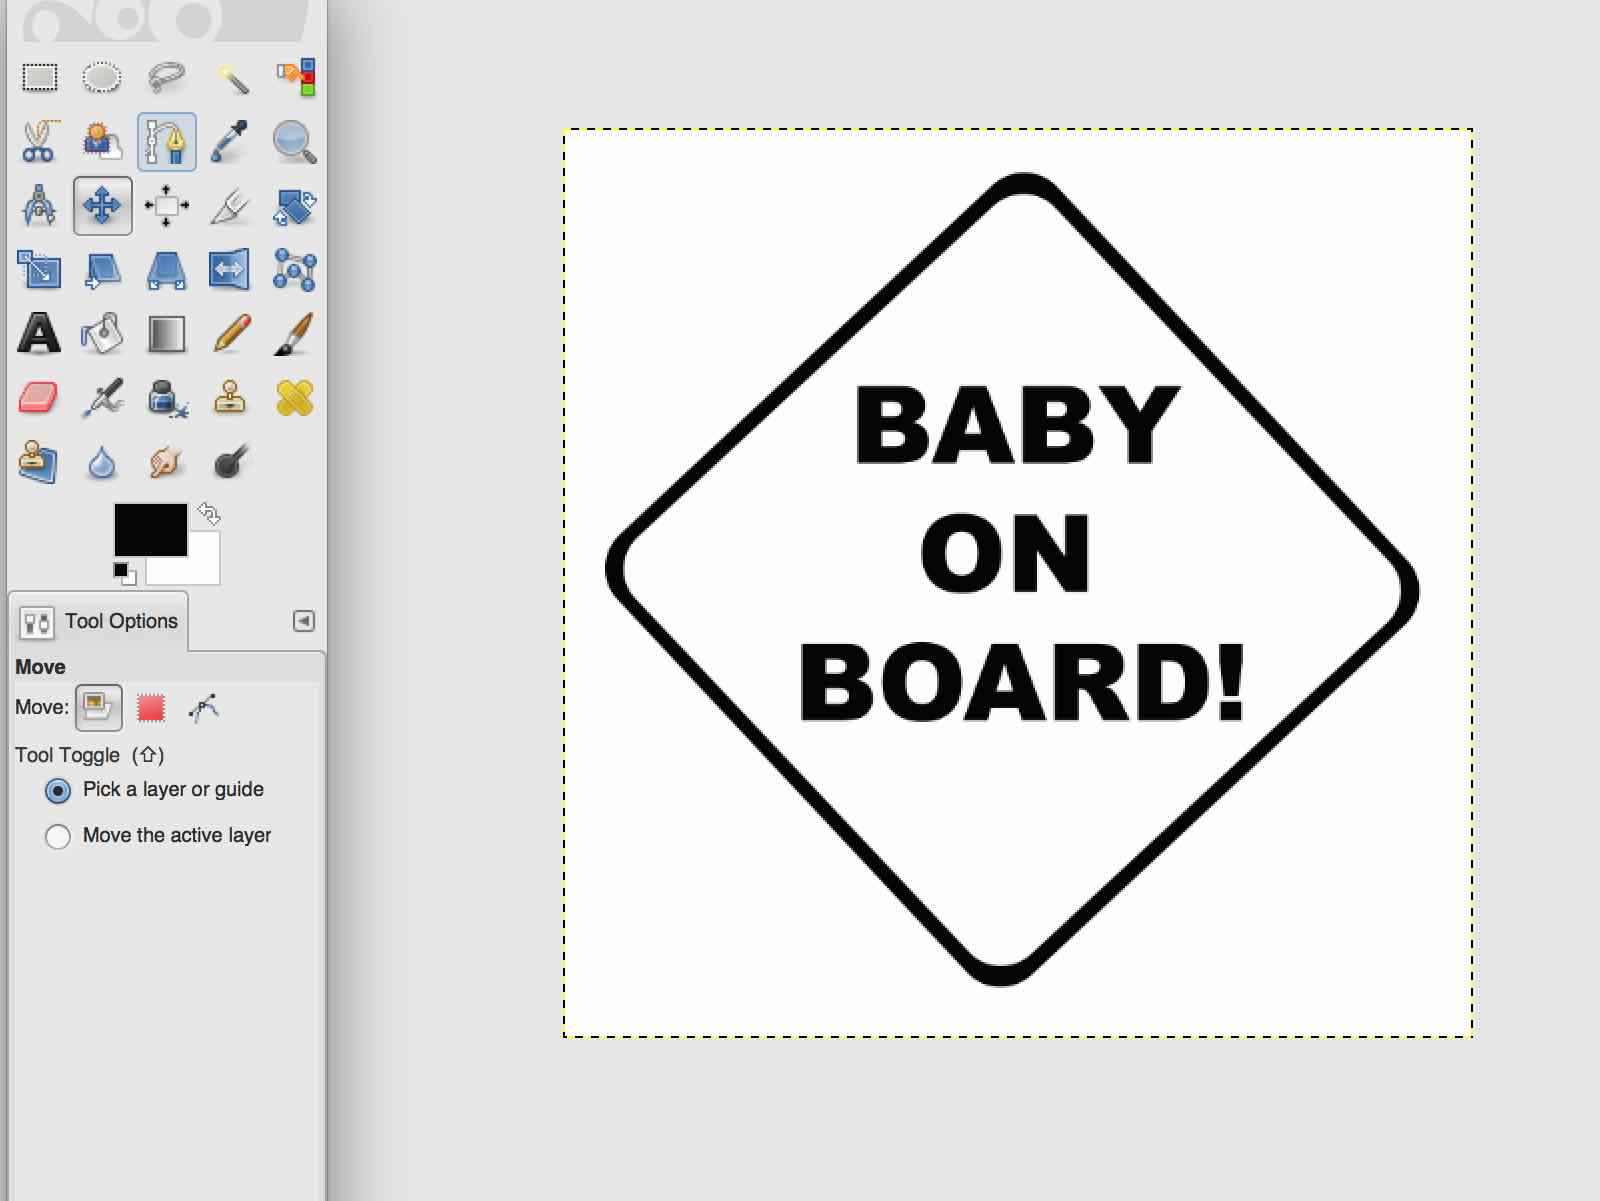 Baby on board collage